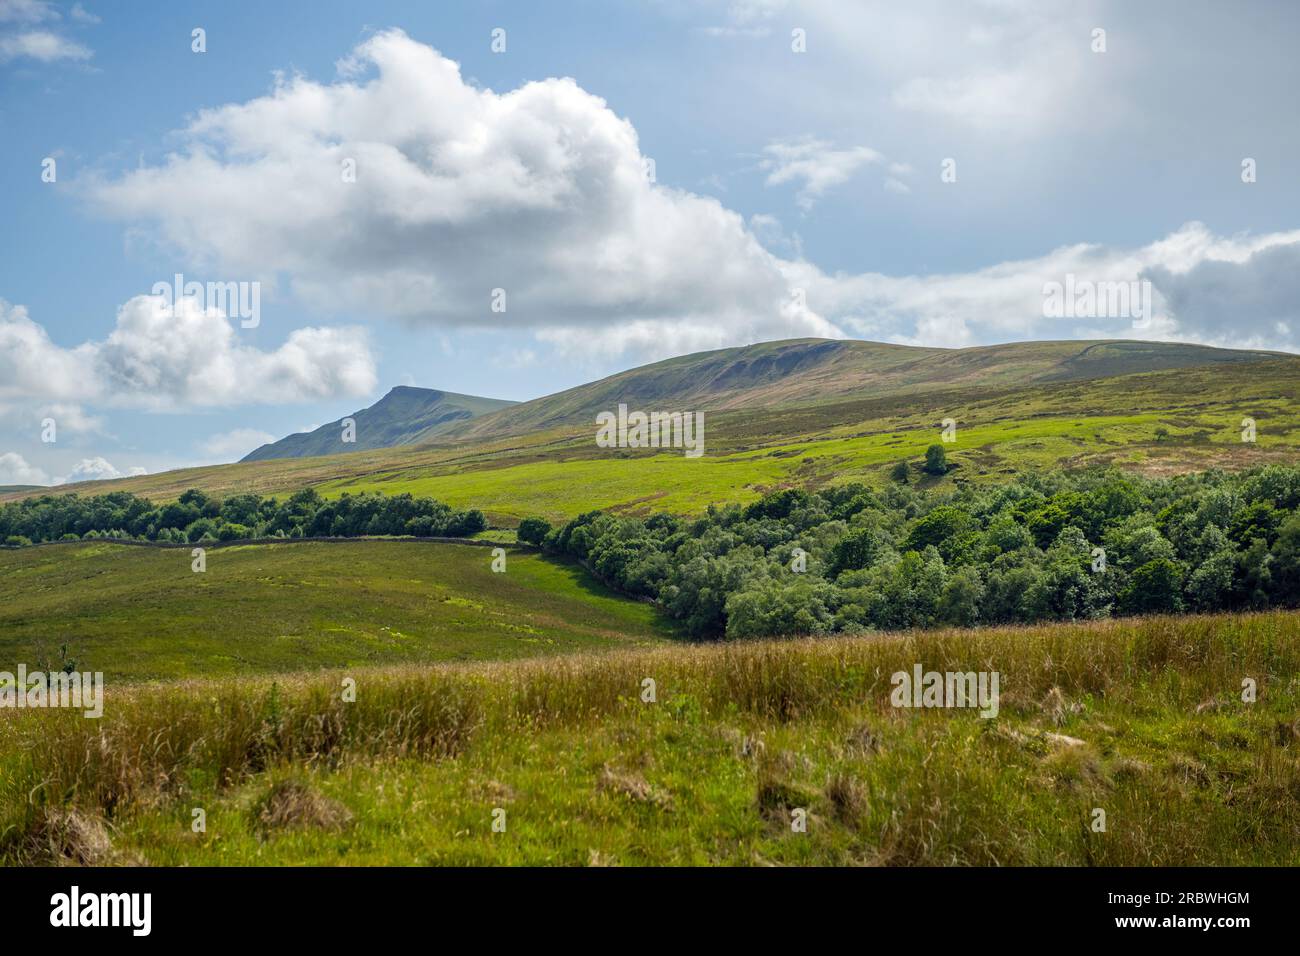 The view towards Wild Boar Fell in Cumbria and overlooking the Mallerstang Valley with its farms and villages below it  - taken from the Tommy Road Stock Photo